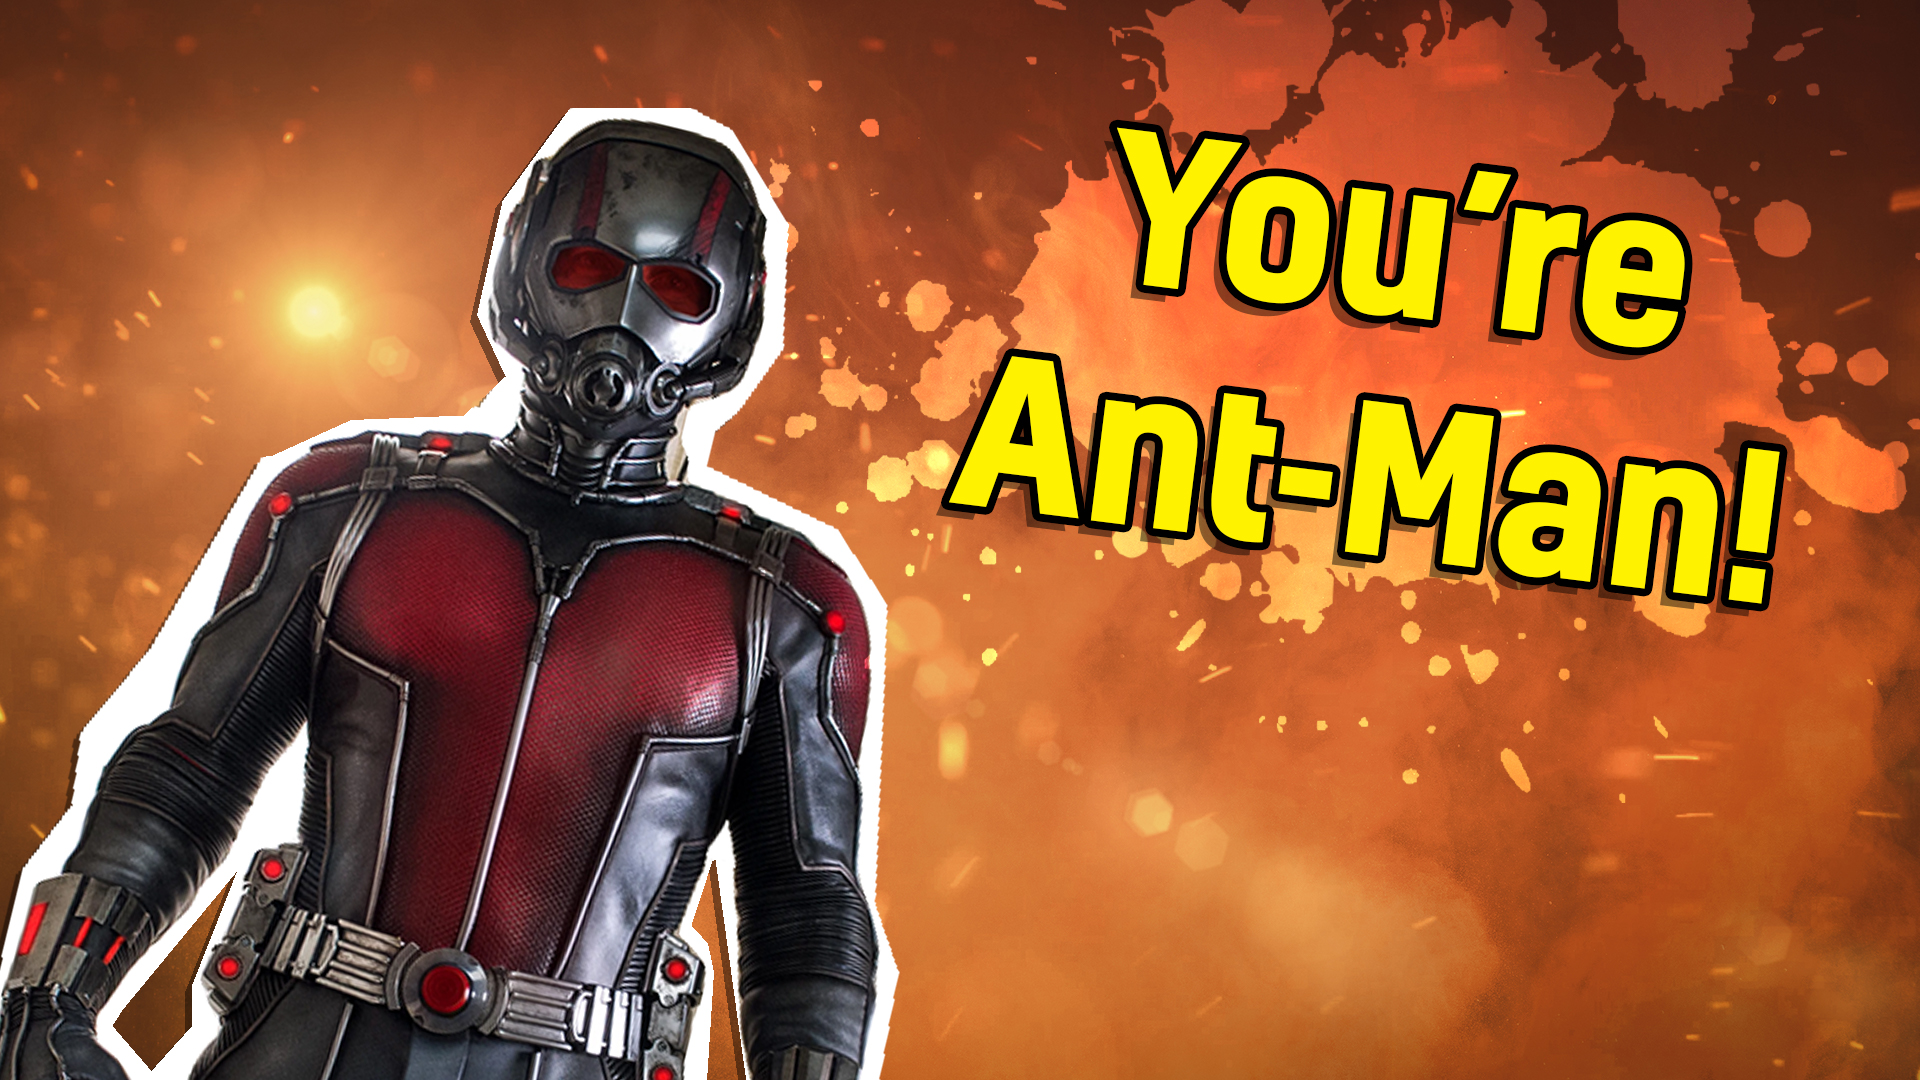 Result: You’re Ant-Man!